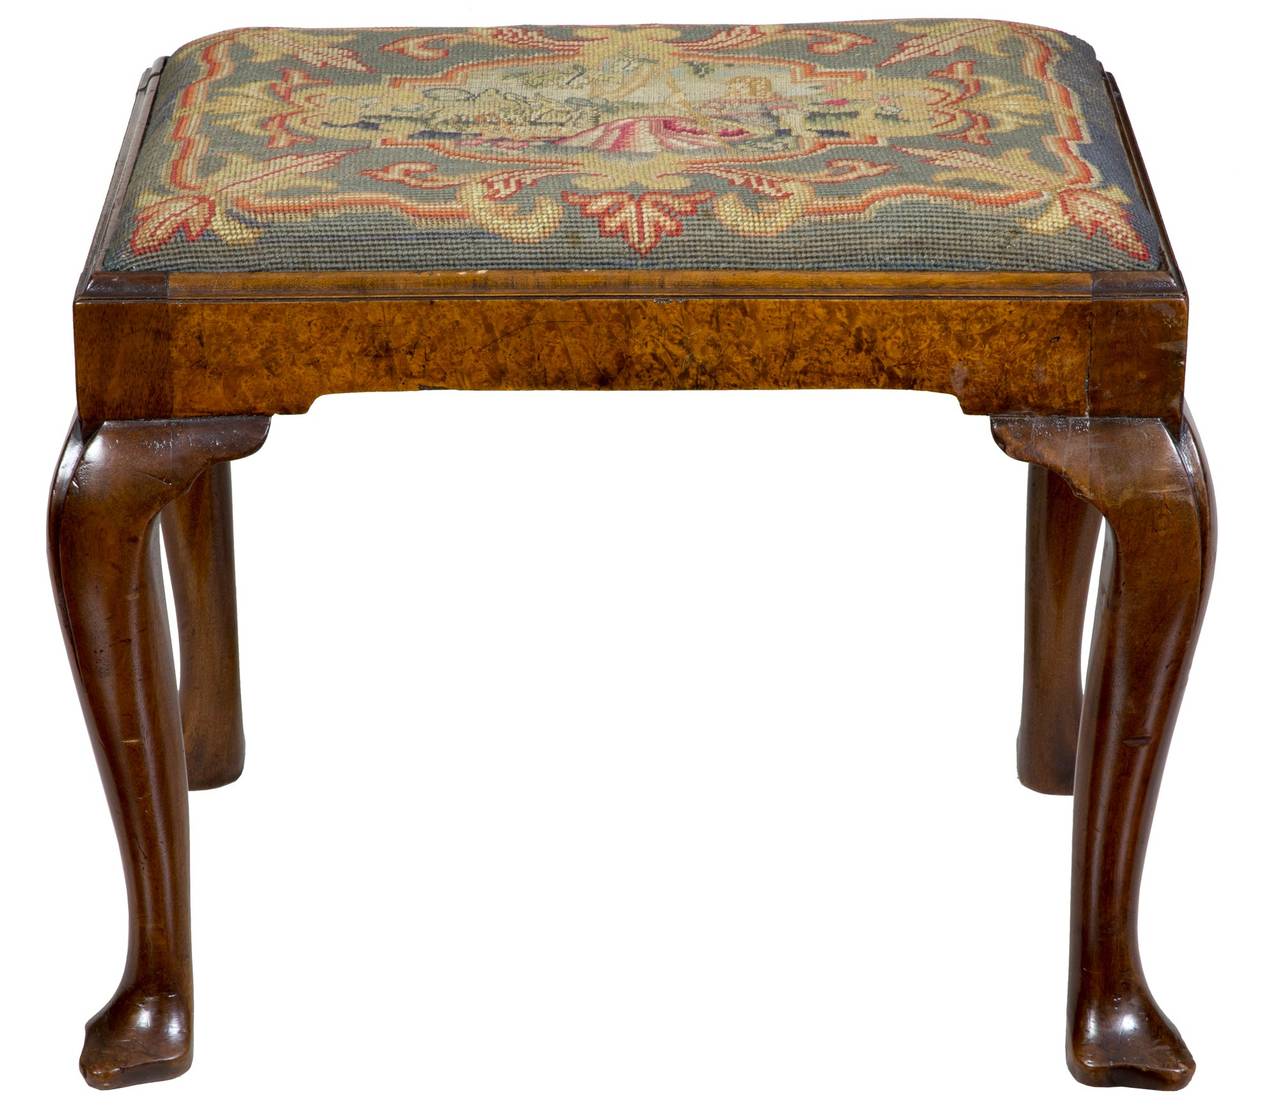 This footstool absolutely appears 18th century, but is a later, mid-19th century example, as these were quite popular and made through the century. The walnut is outstanding and has an old wax surface. The tapestry upholstery is in excellent